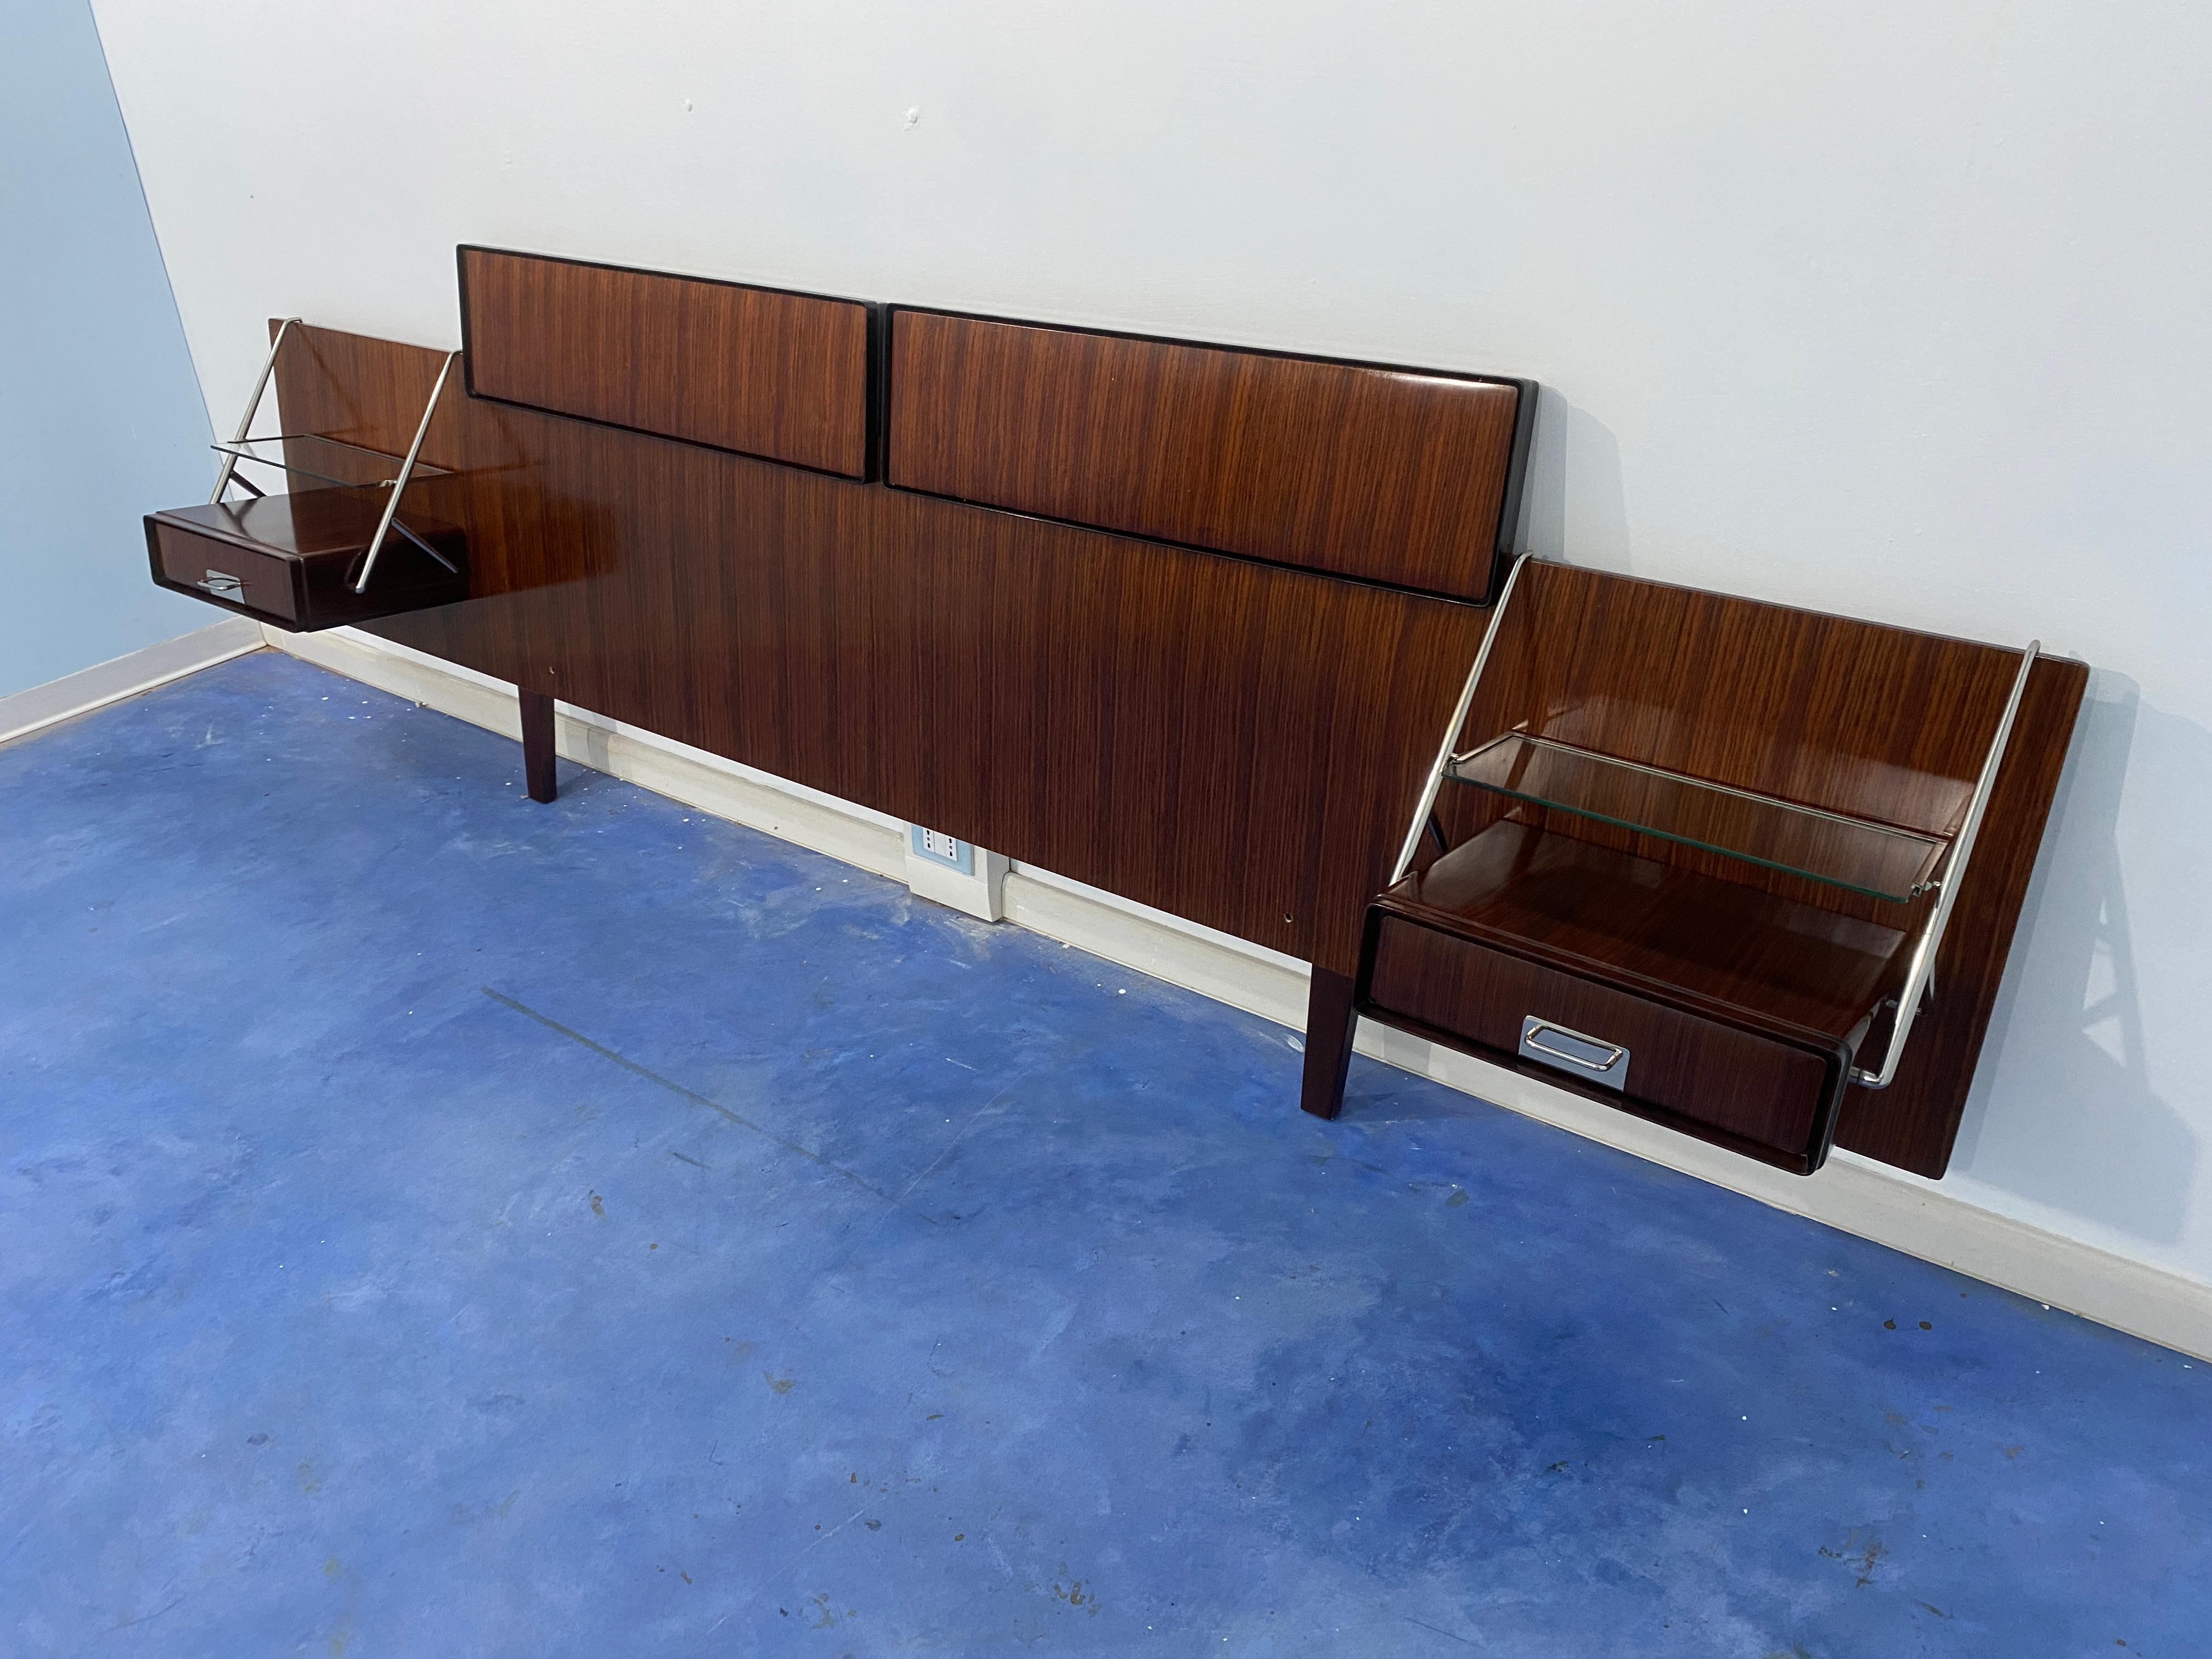 Other Italian nightstands from the 1950s with headboard bed designed by Silvio Cavatorta